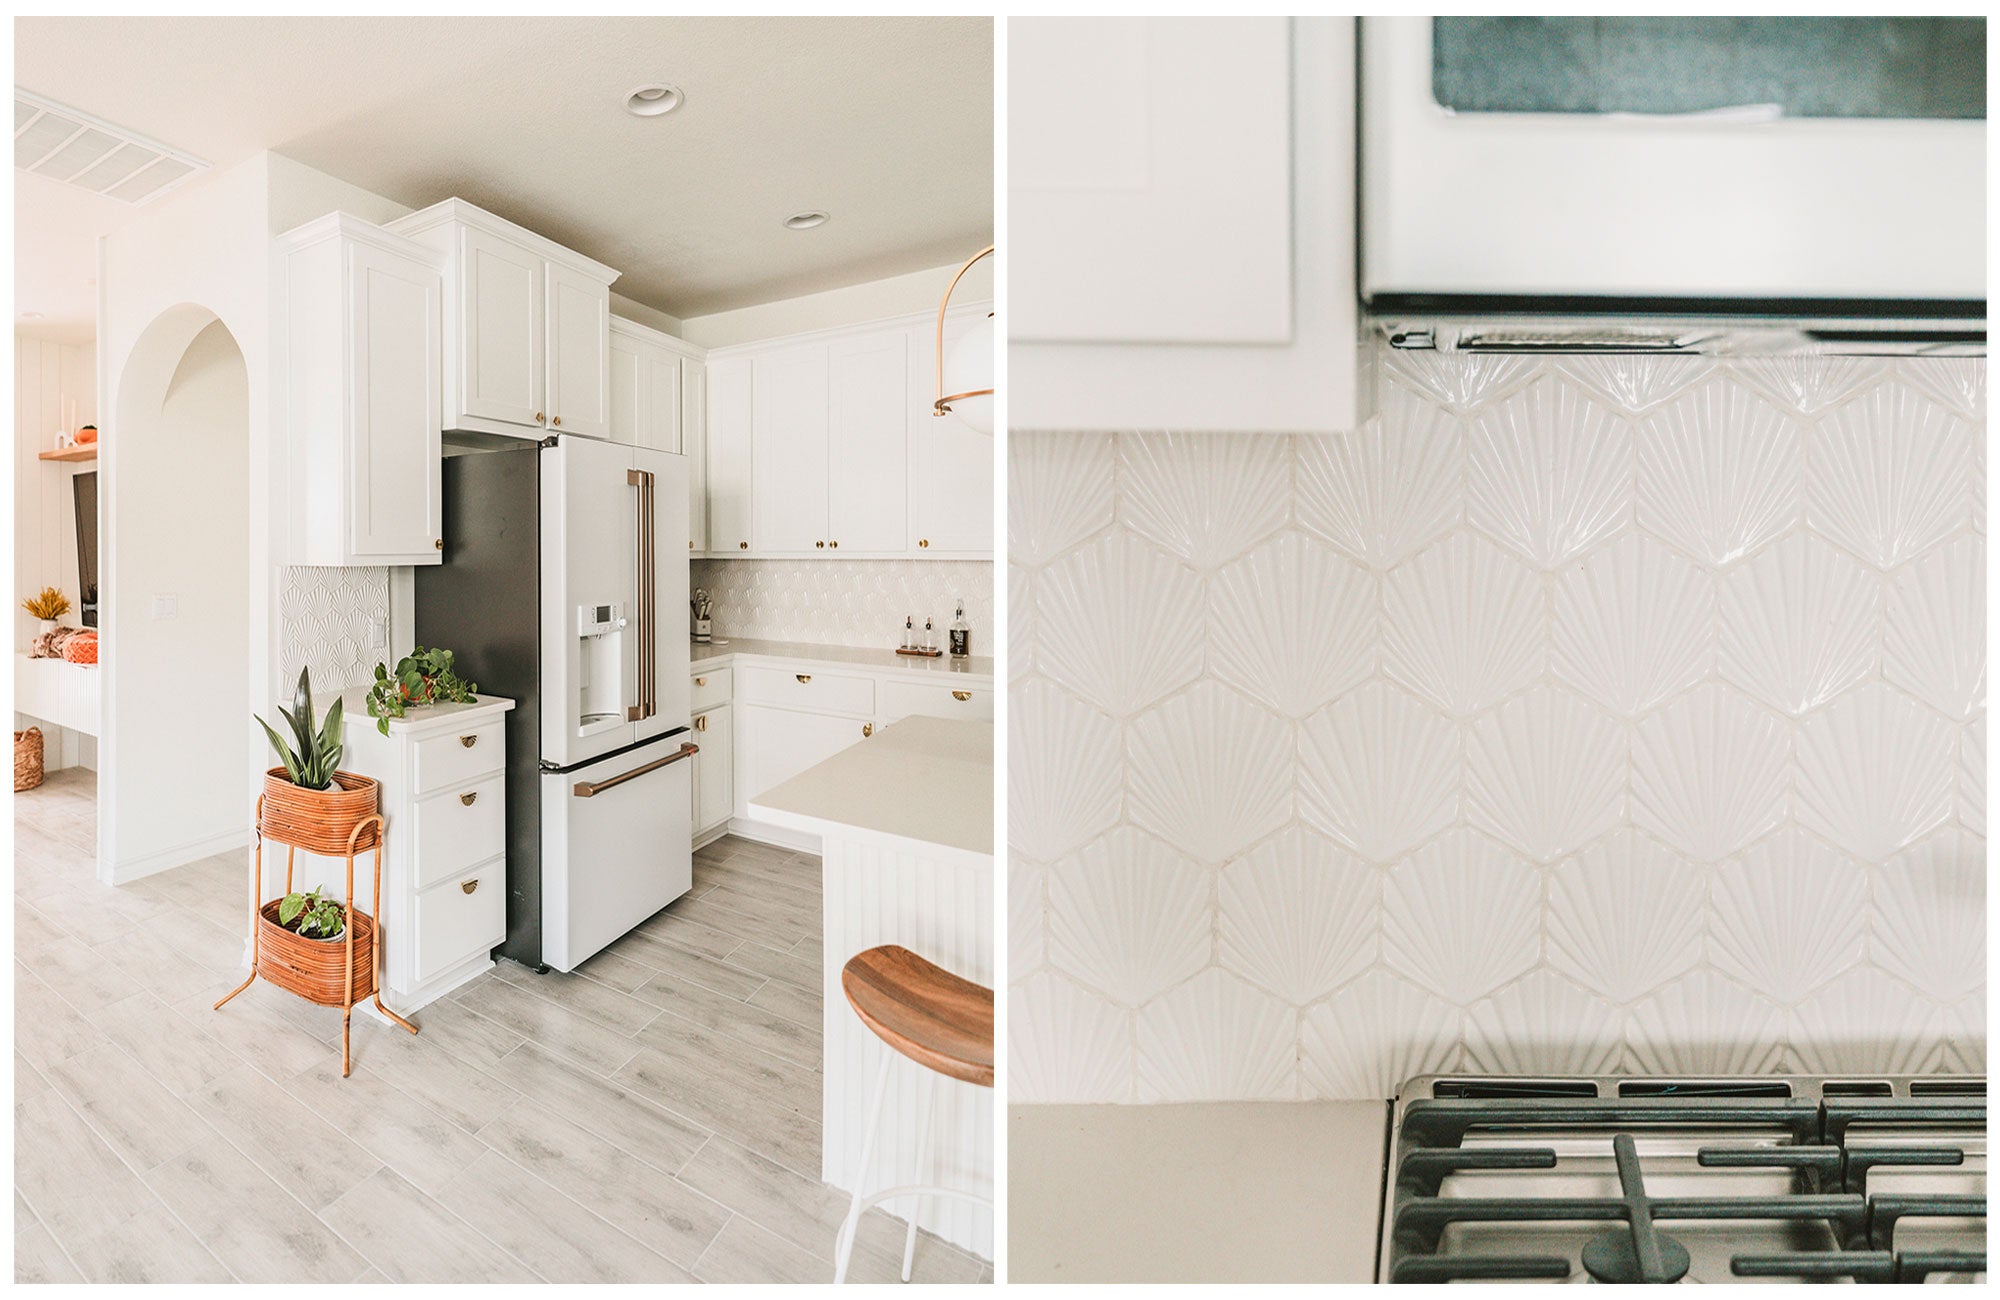 Details of kitchen Backsplash with white palmas tiles by Clay Imports